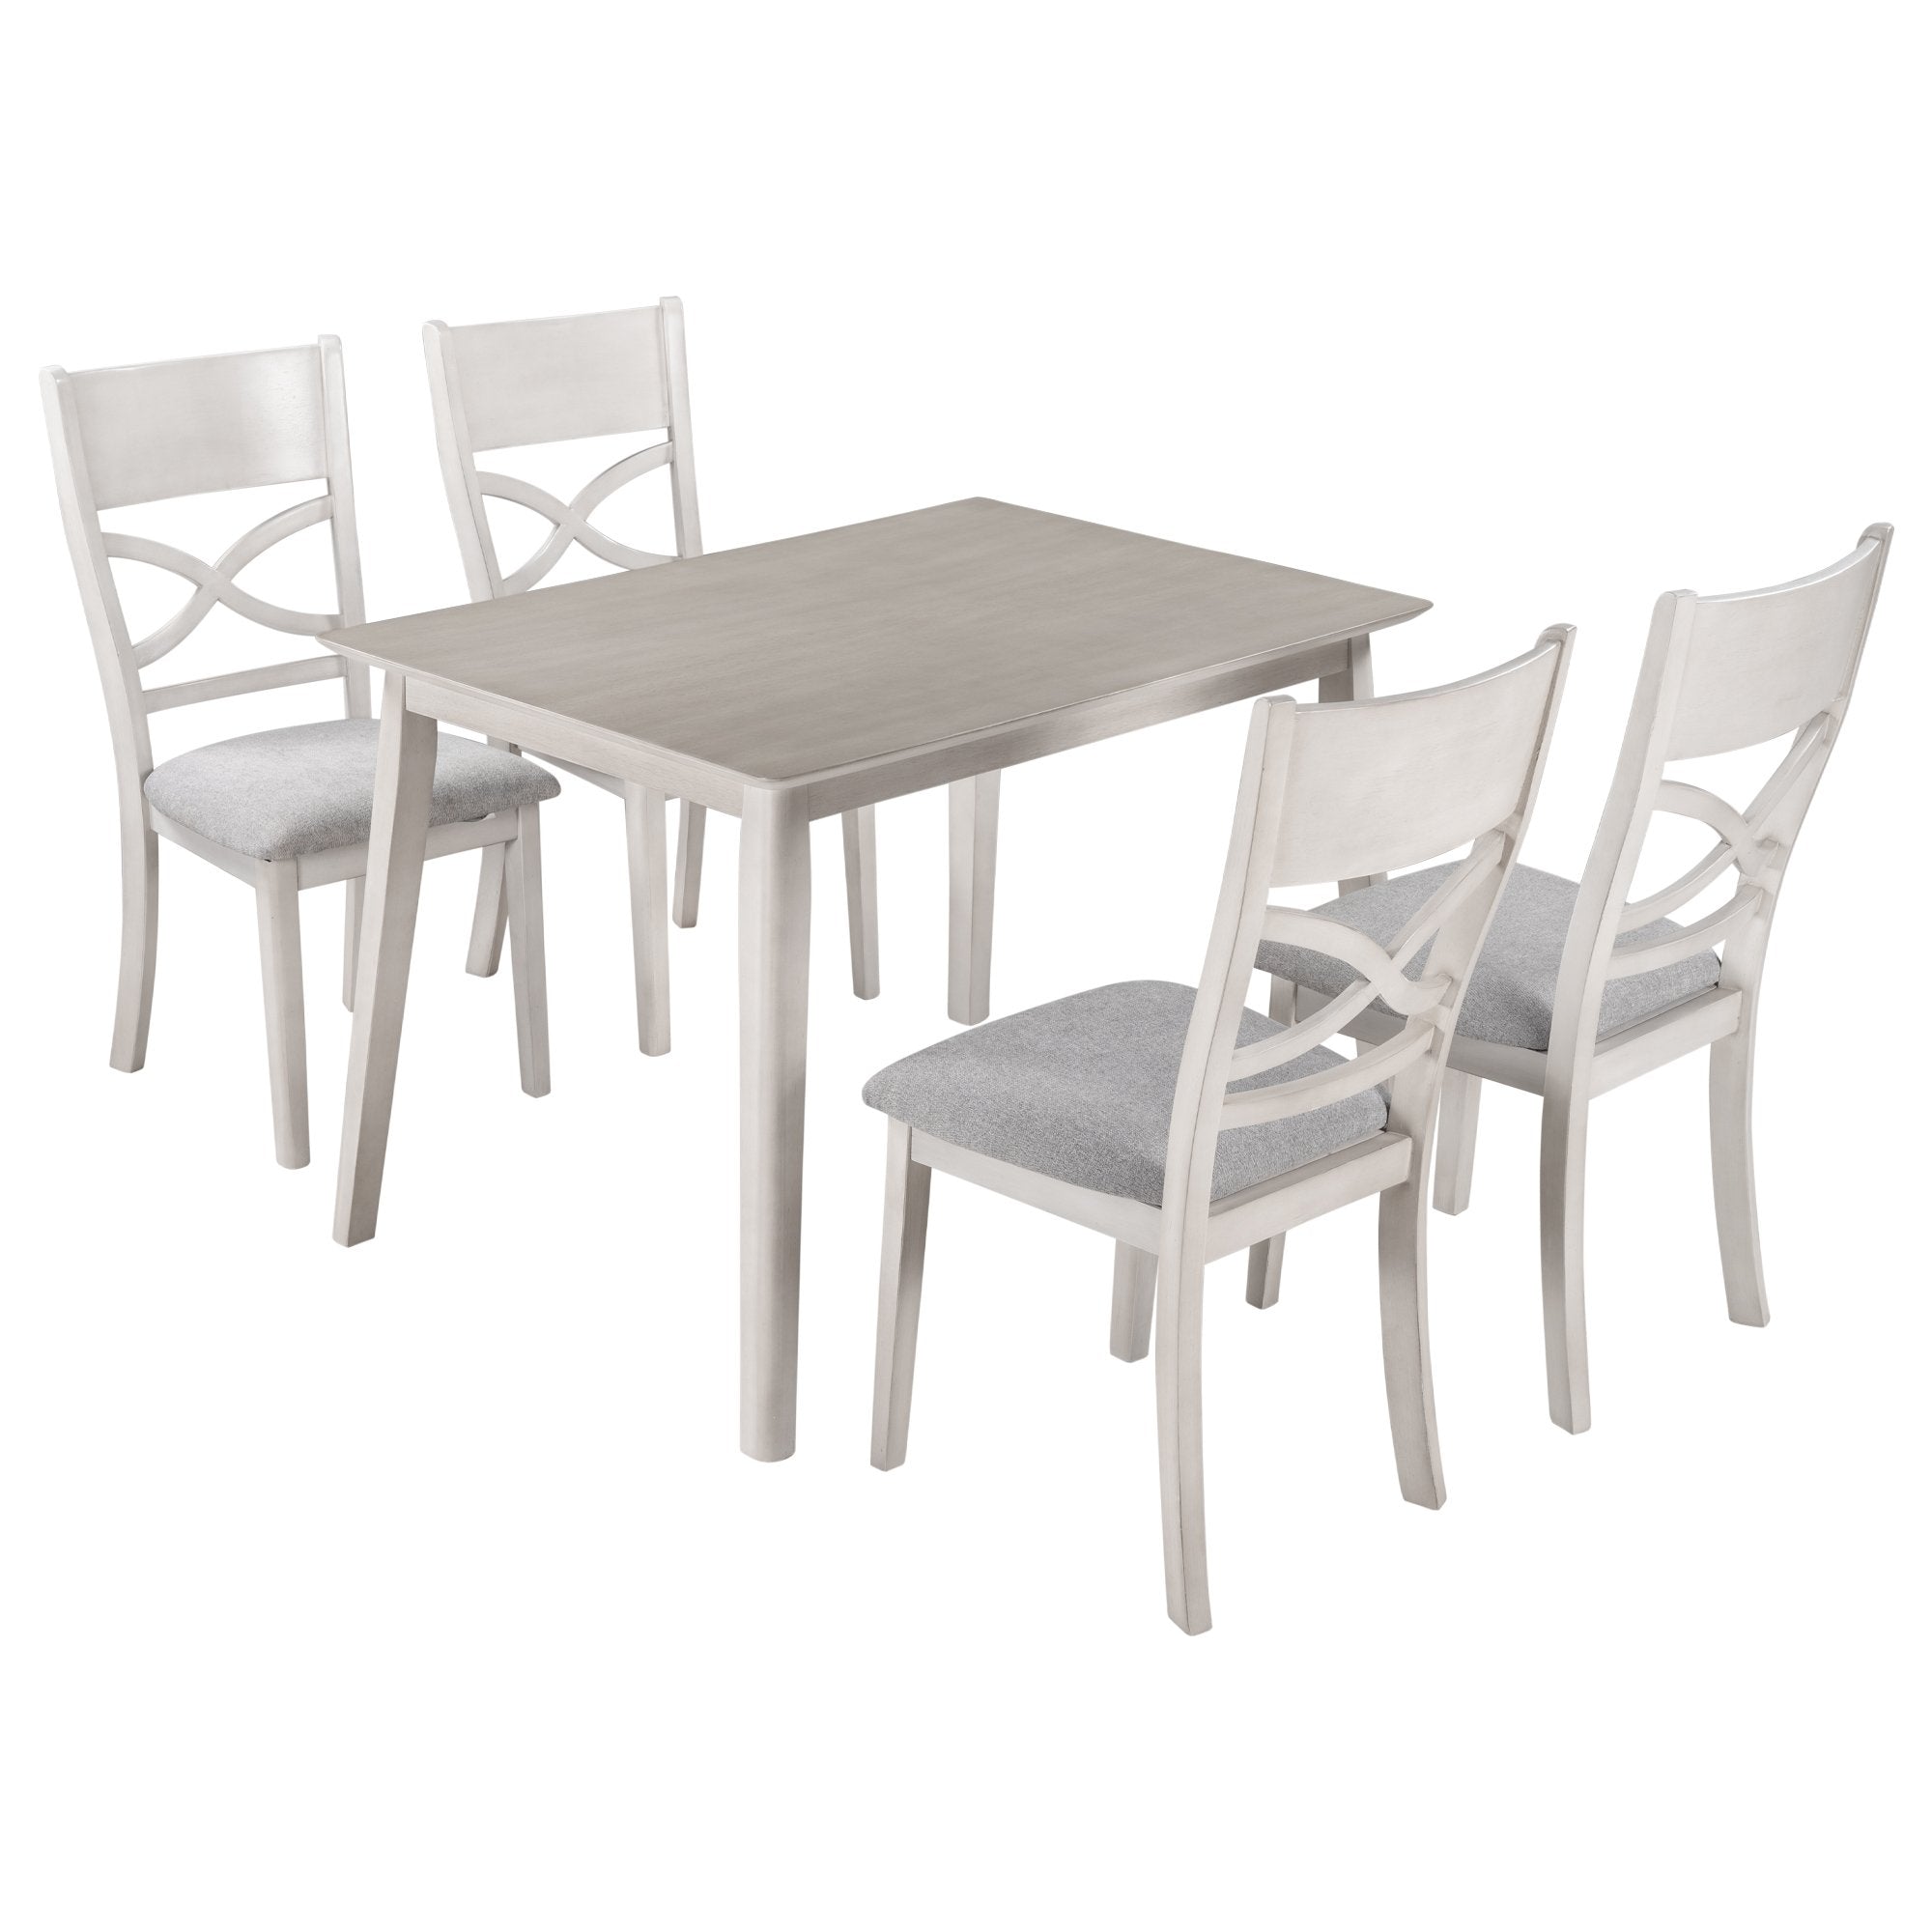 Farmhouse Rustic Wood 5-Piece Kitchen Dining Table Set with 4 Upholstered Padded Chairs, Light Grey+White-Boyel Living